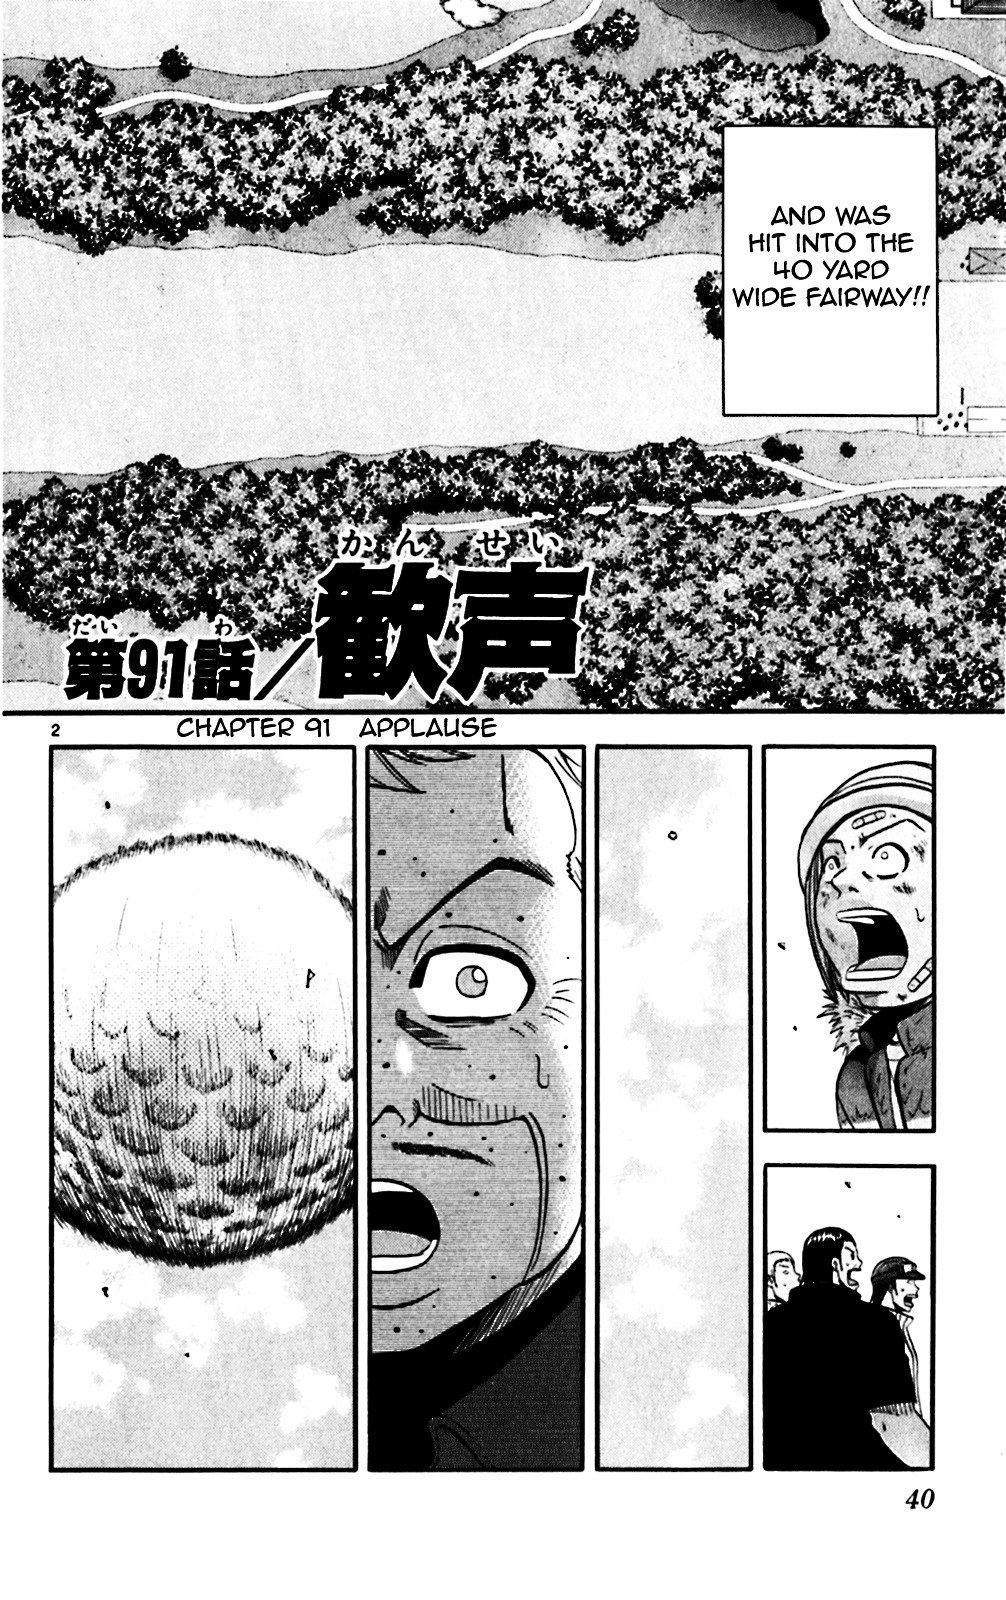 King Golf - Page 2